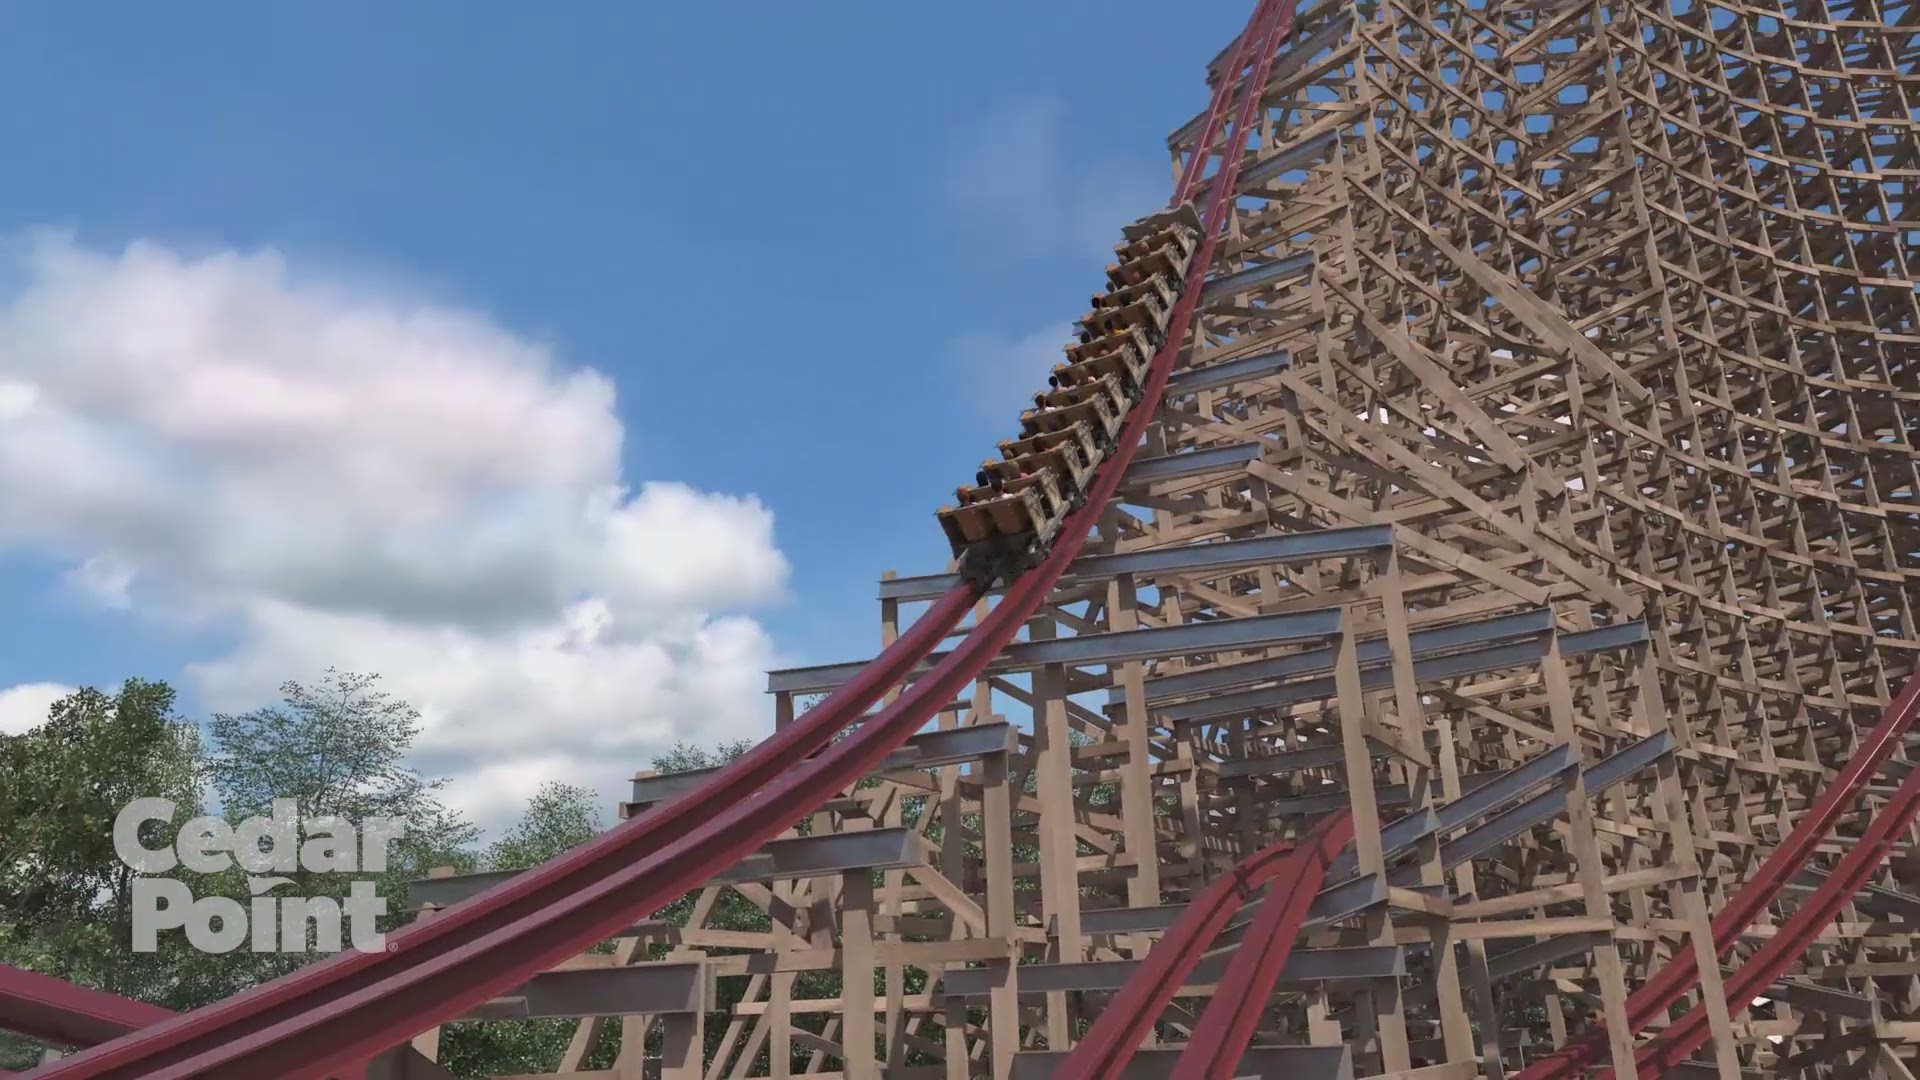 Cedar Point's new roller coaster, Steel Vengeance, will be the tallest, fastest, steepest wood-steel hybrid ride ever created. Here's what you can expect from the new wild ride when it opens in May 2018.